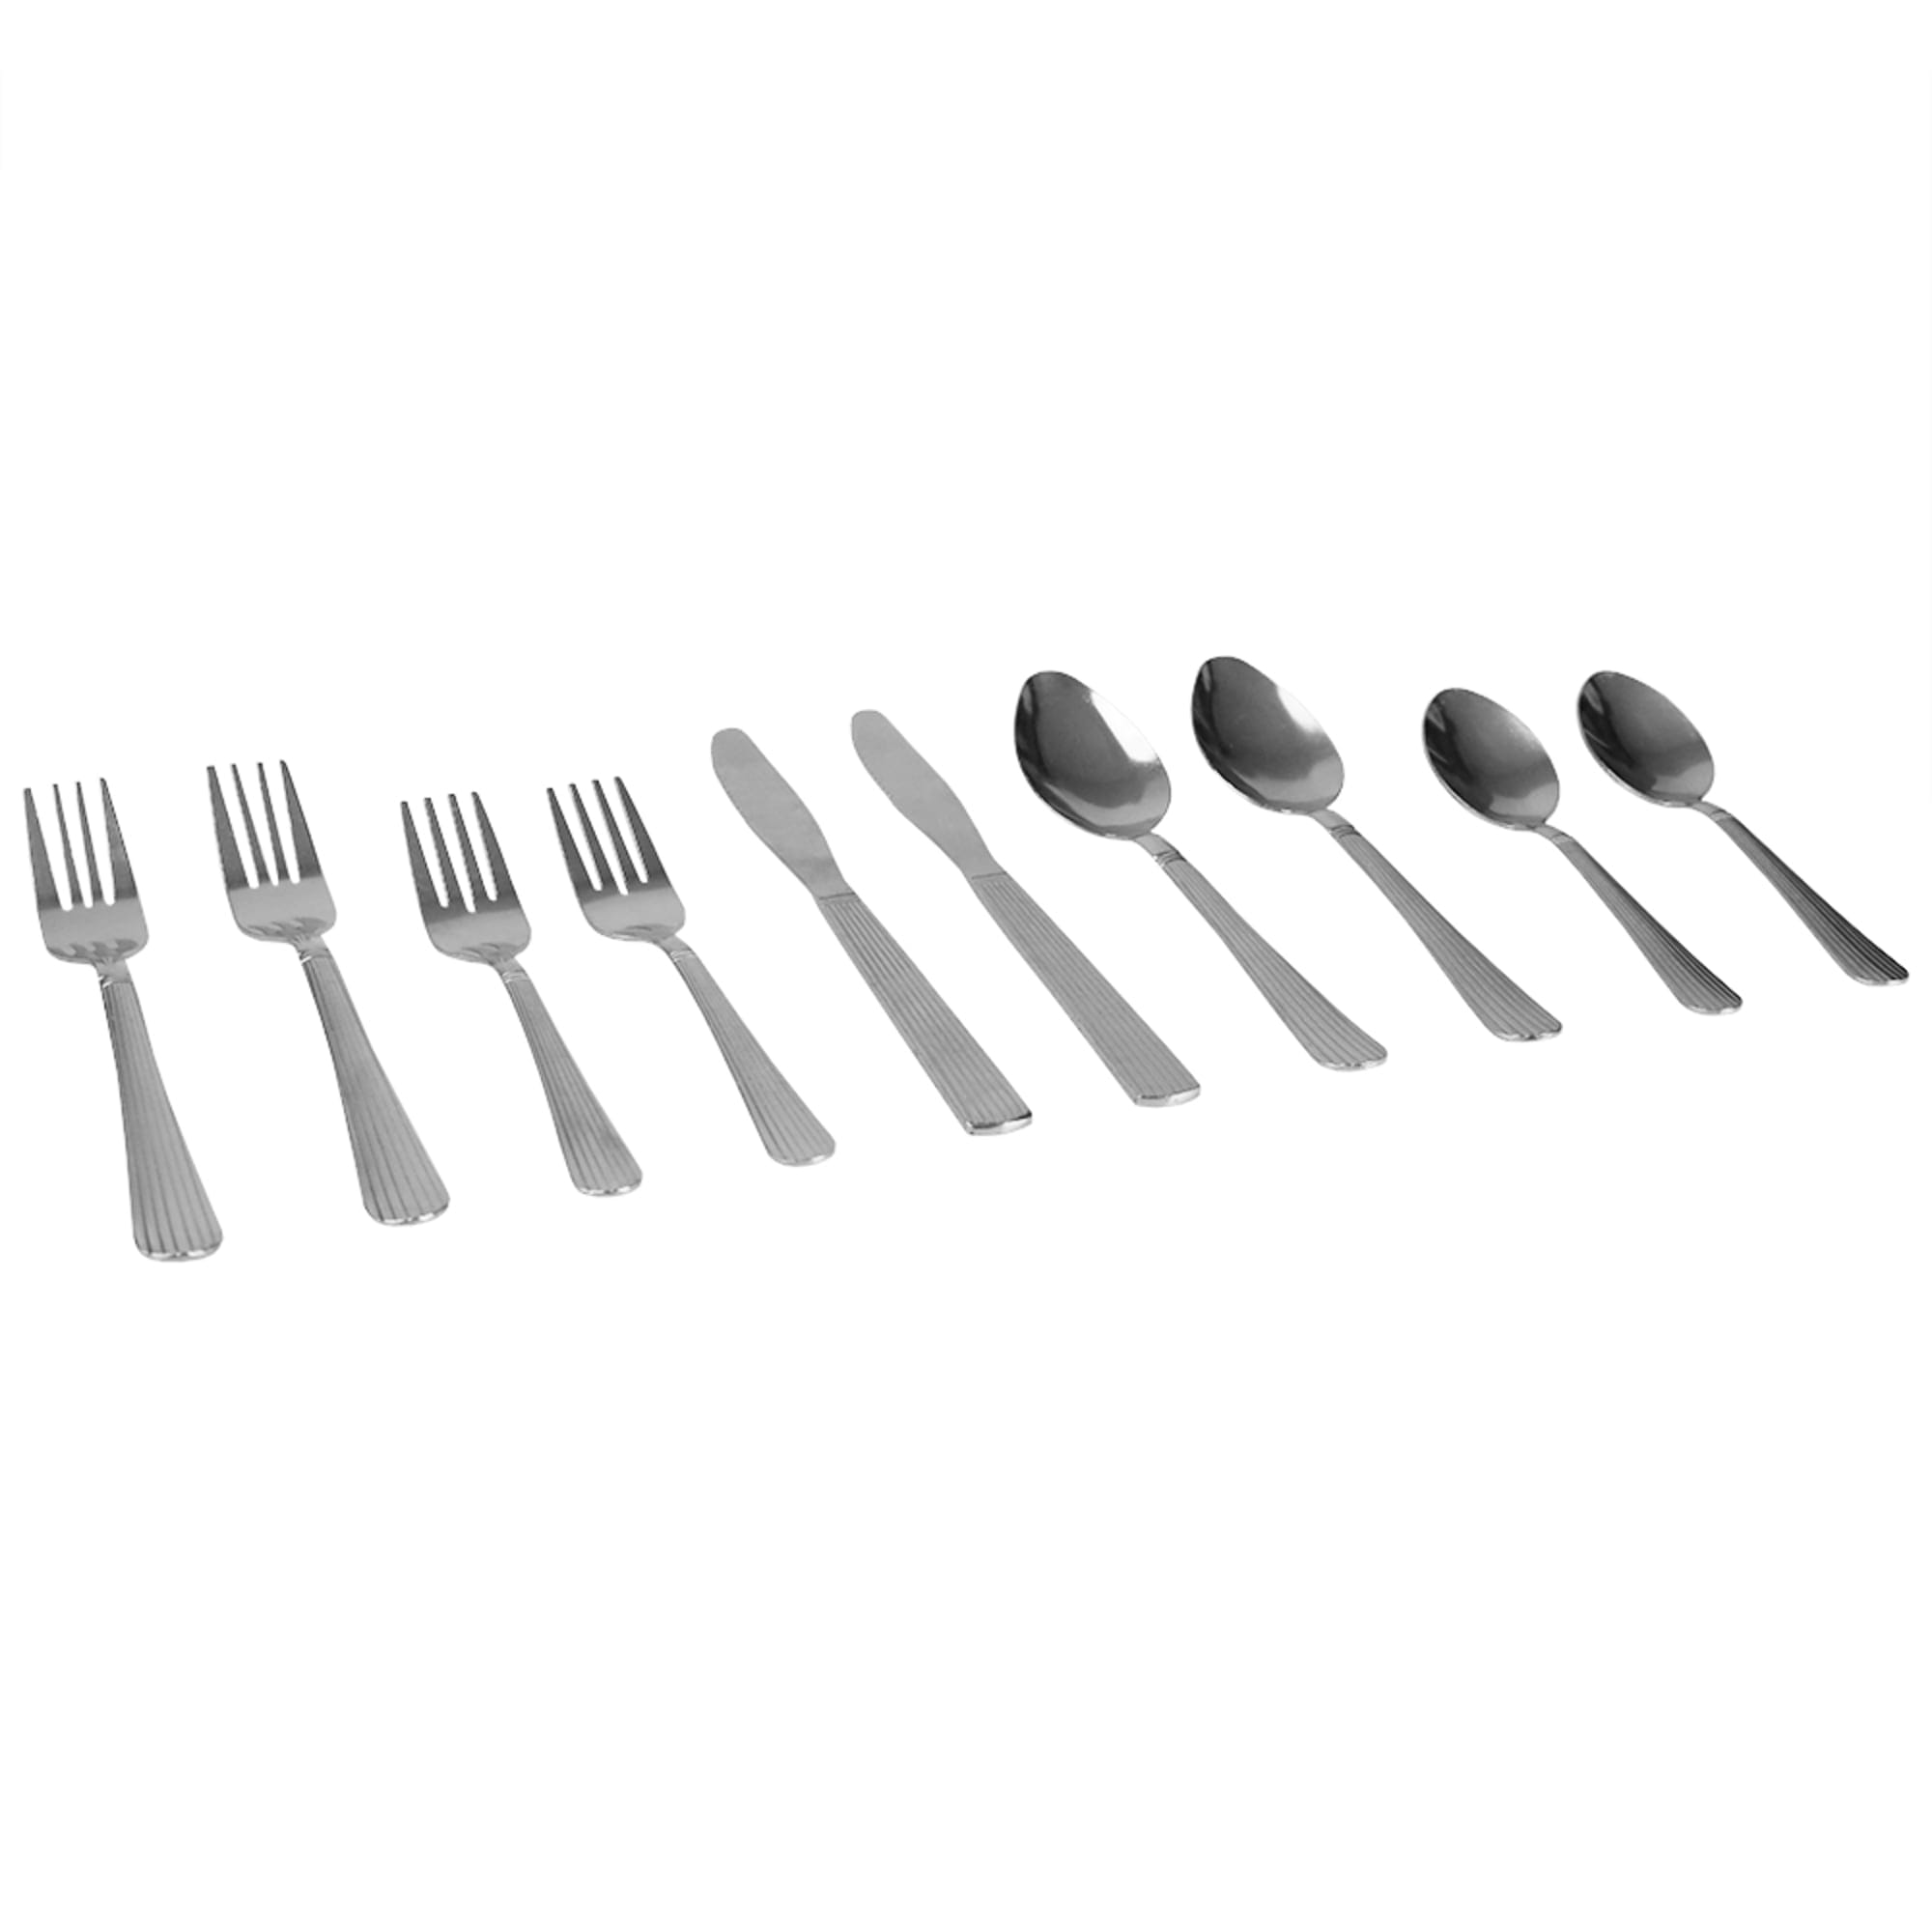 Home Basics Danbury 20 Piece Stainless Steel Flatware Set, Silver $8.00 EACH, CASE PACK OF 12